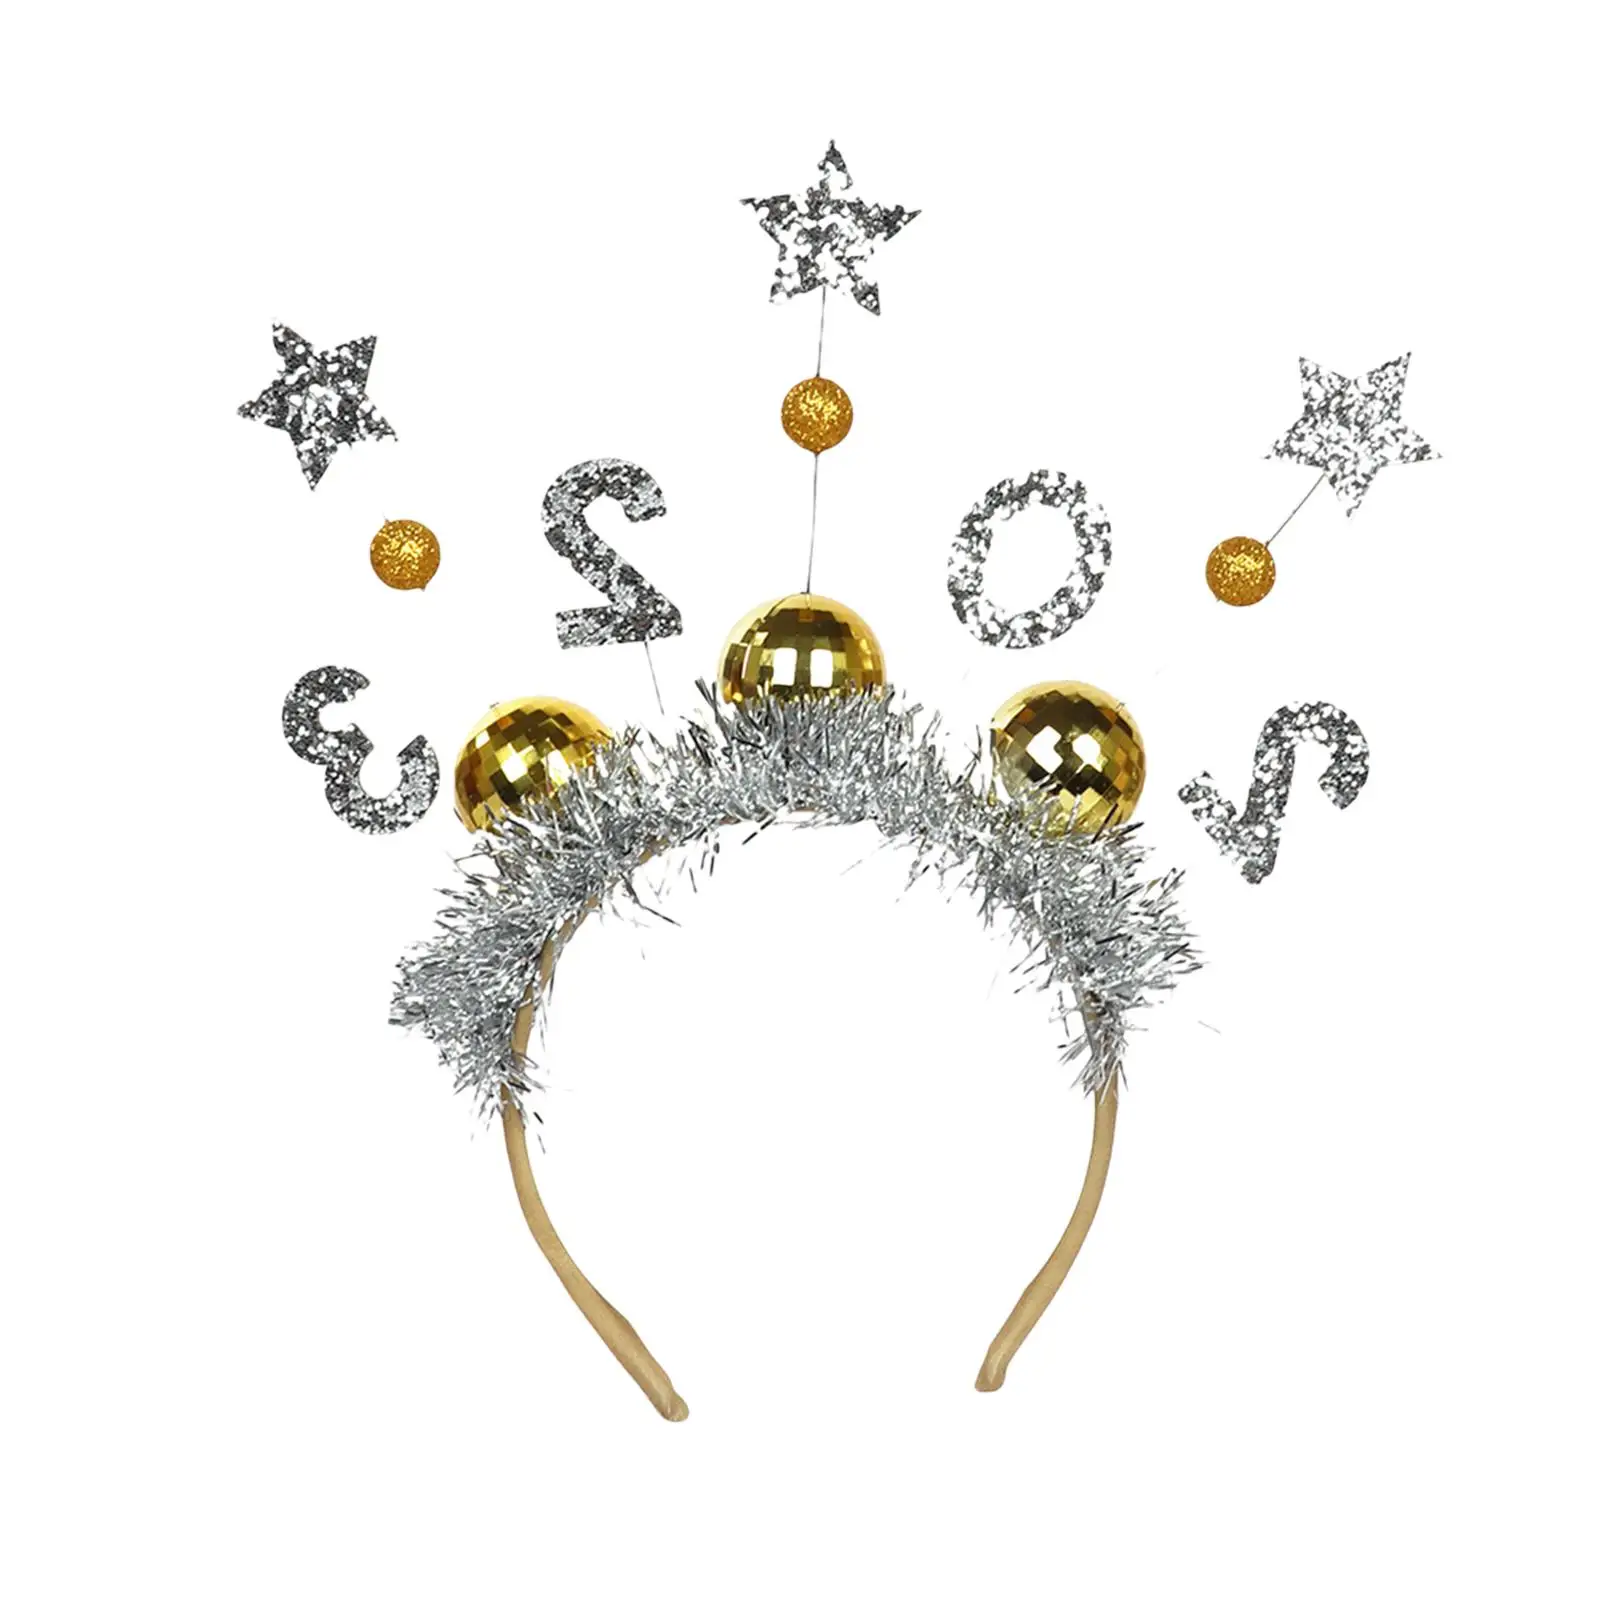 2023 New Year Headband Hair Hoop Tiara Glitter Number Shape Hairbands Hair Accessory for New Year Eve Party Favors Supplies Men